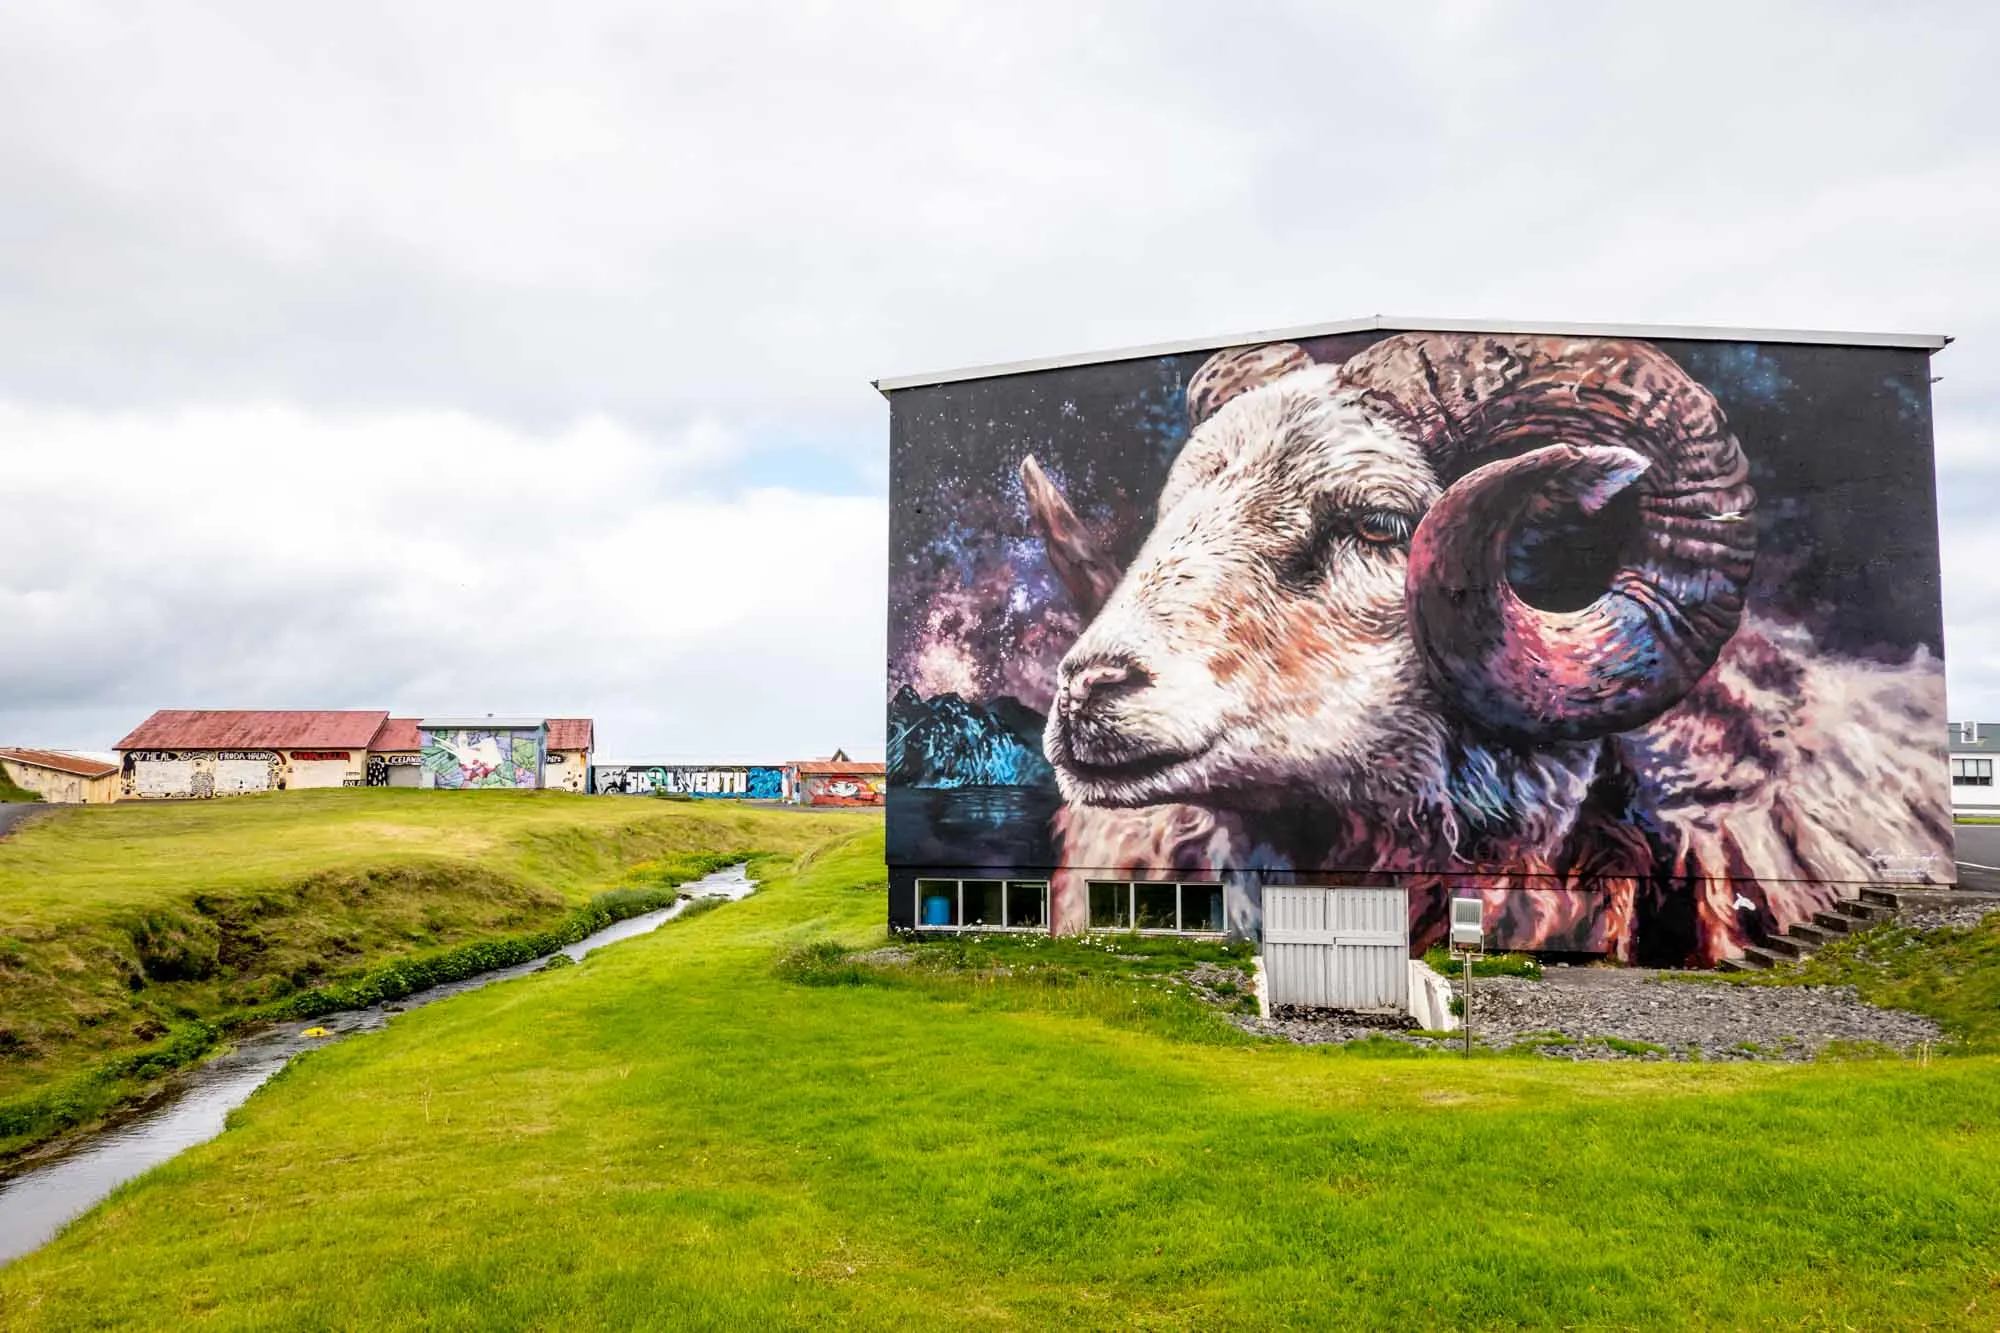 Mural of a ram with horns on side of a building